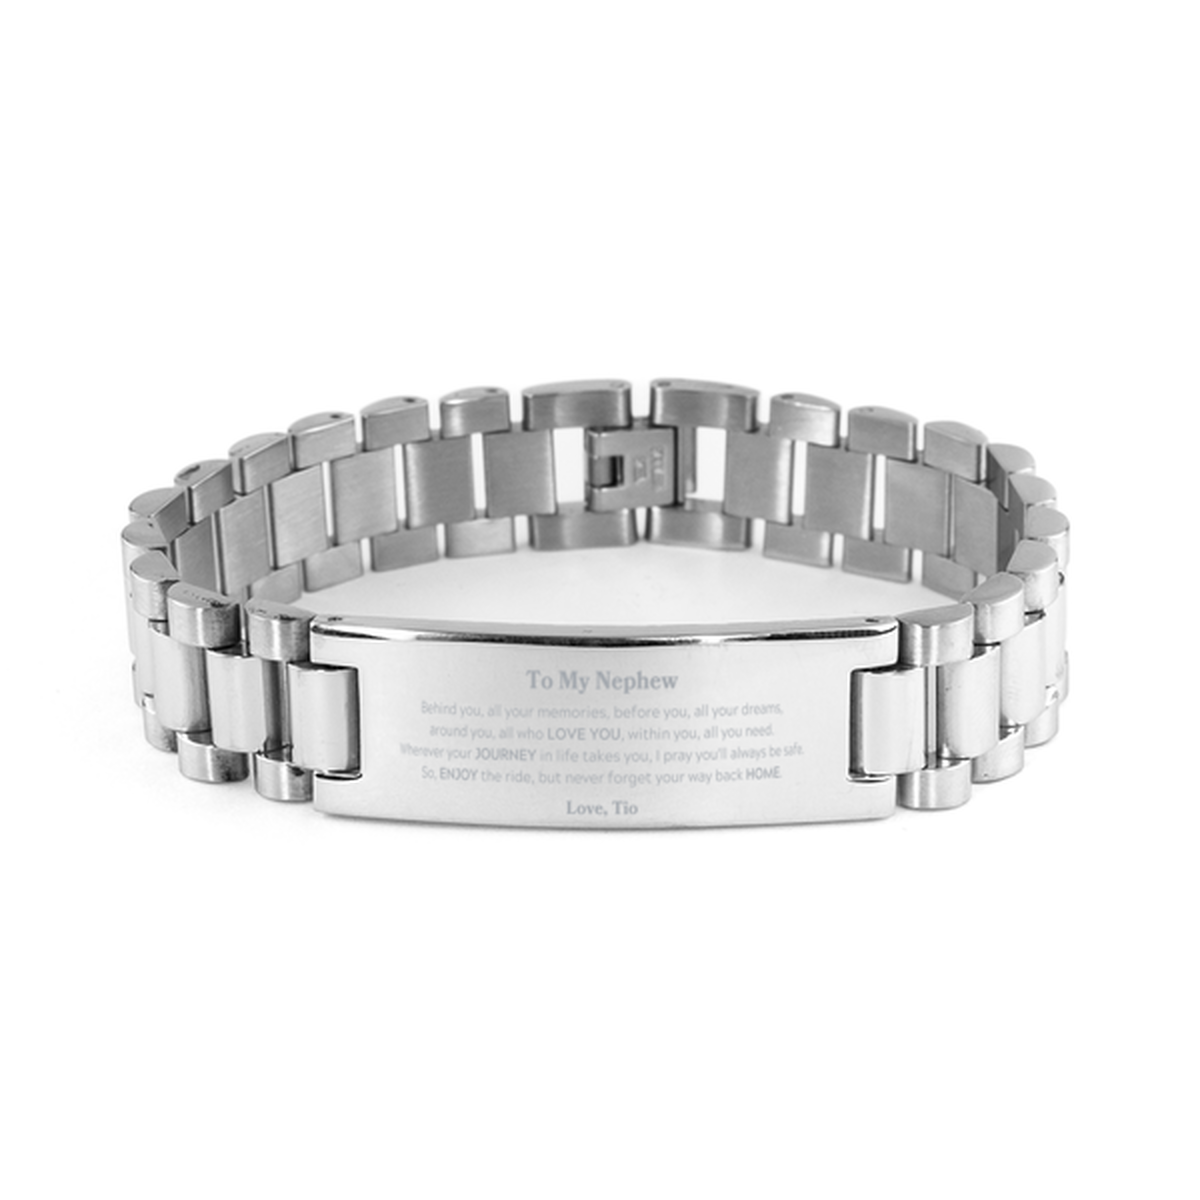 To My Nephew Graduation Gifts from Tio, Nephew Ladder Stainless Steel Bracelet Christmas Birthday Gifts for Nephew Behind you, all your memories, before you, all your dreams. Love, Tio